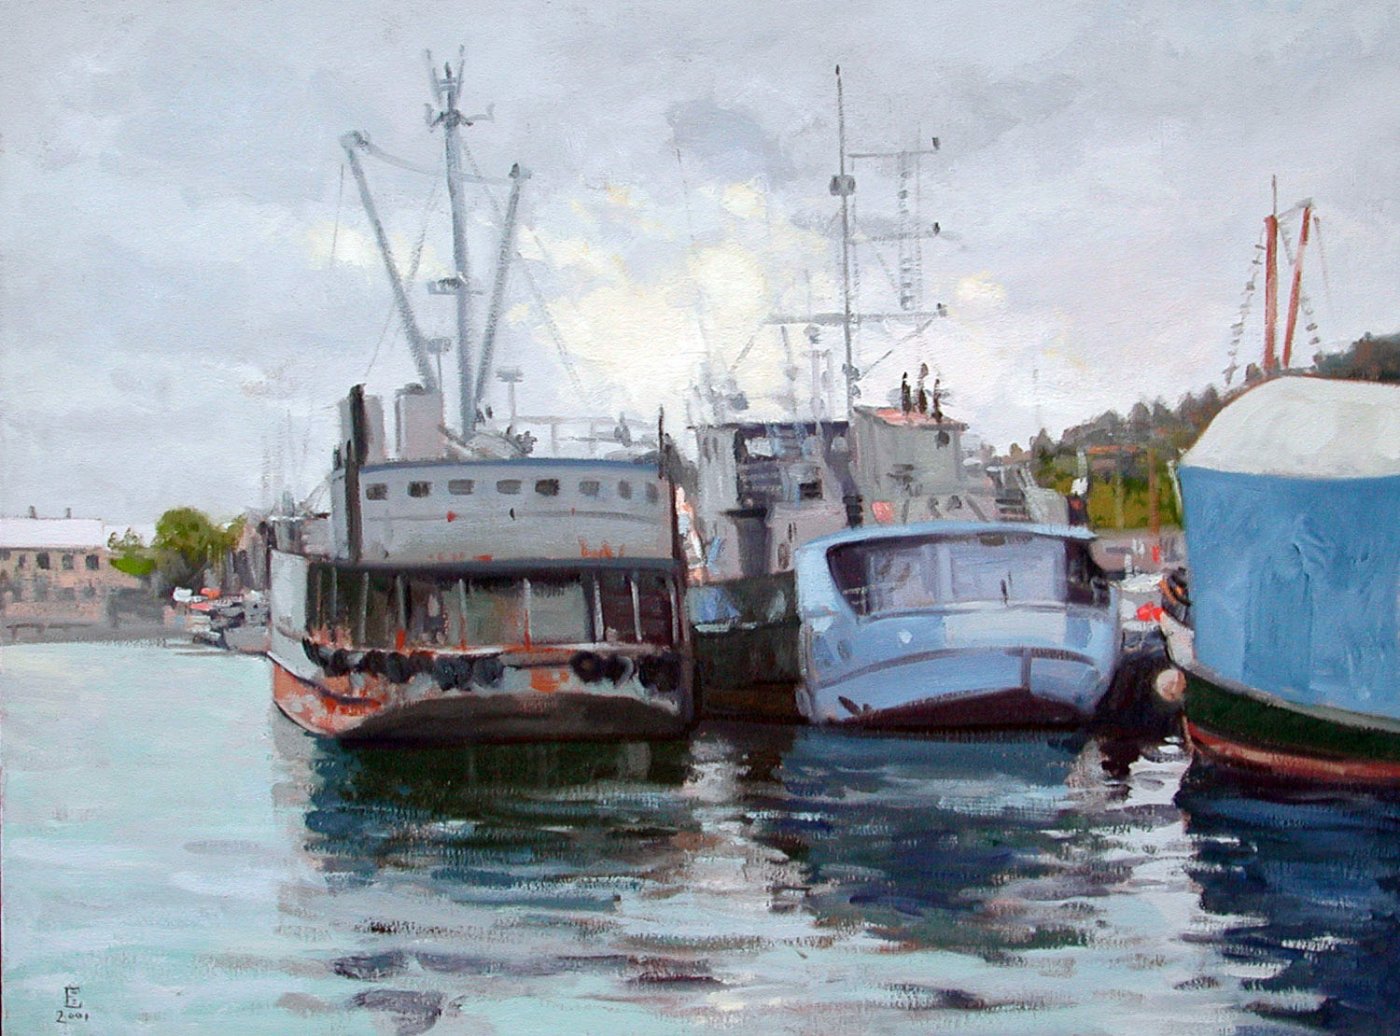 Fishermen's Terminal I, oil on canvas, 24 X 32 inches, copyright ©2001